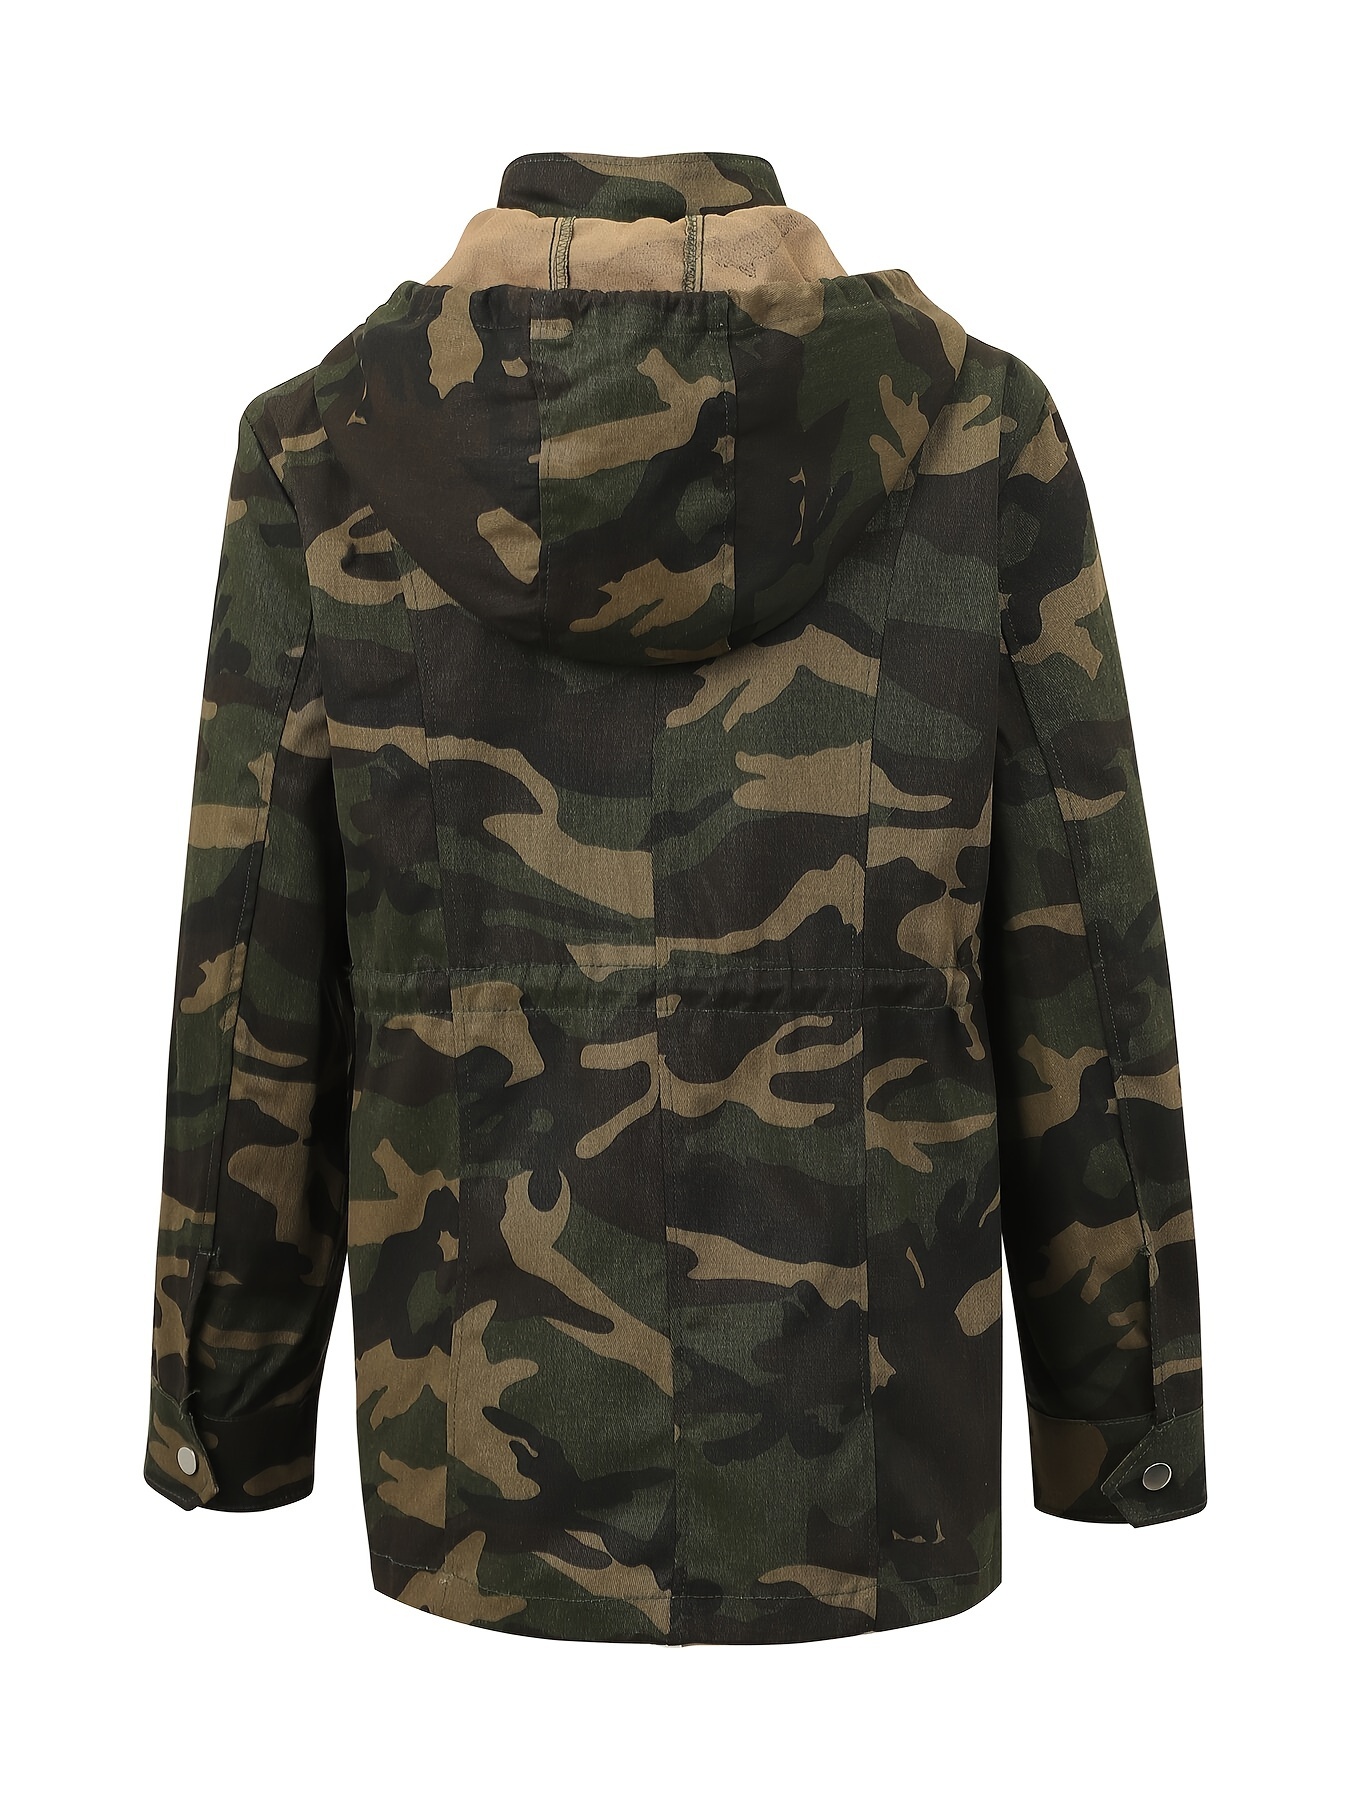 camouflage print zipper front jacket casual flap pockets drawstring long sleeve hooded jacket for spring fall womens clothing